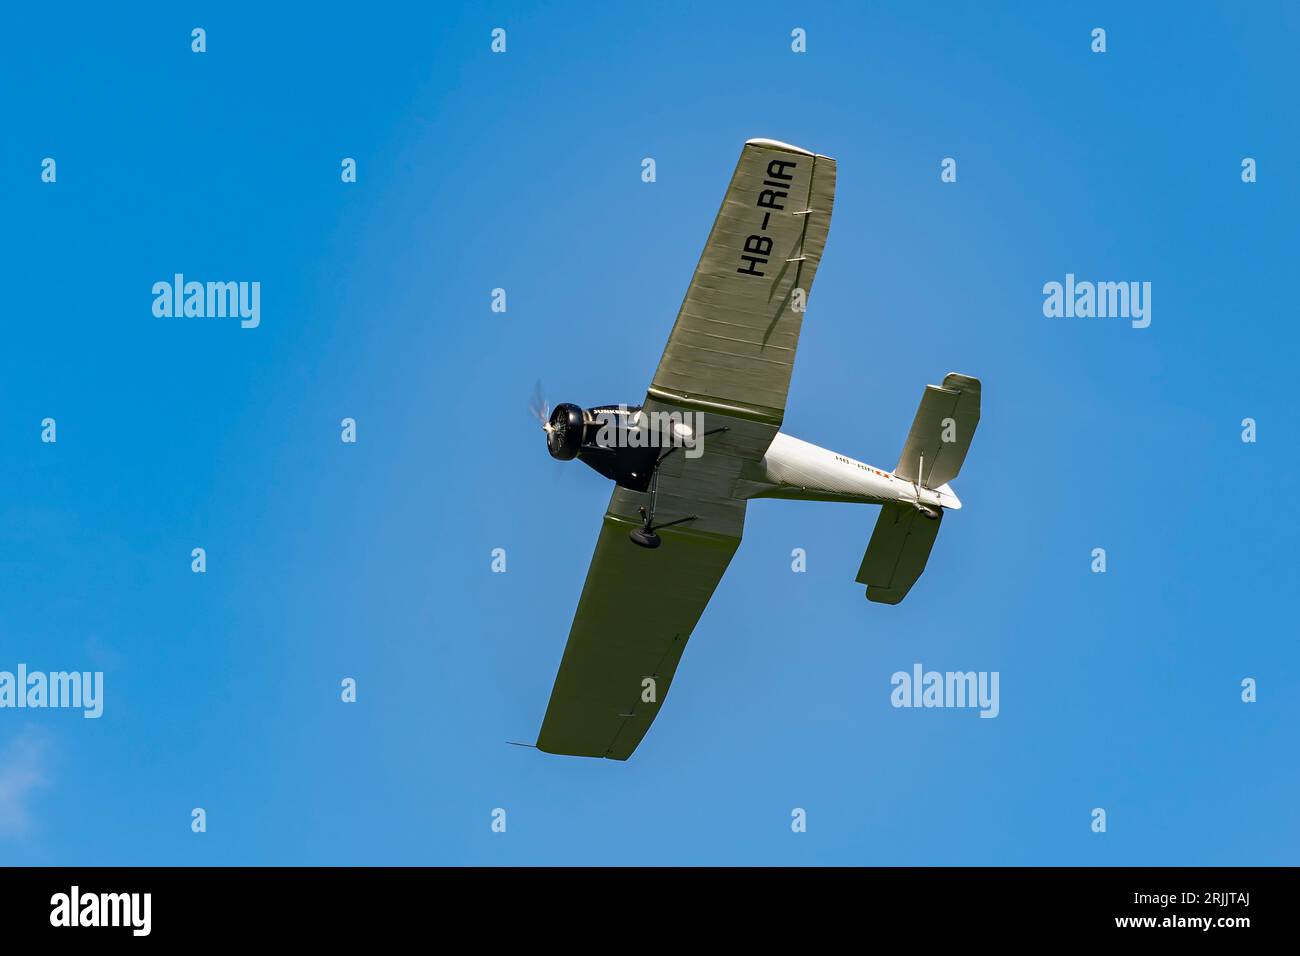 hi-res - images high and wing photography stock Piston engine monoplane Alamy